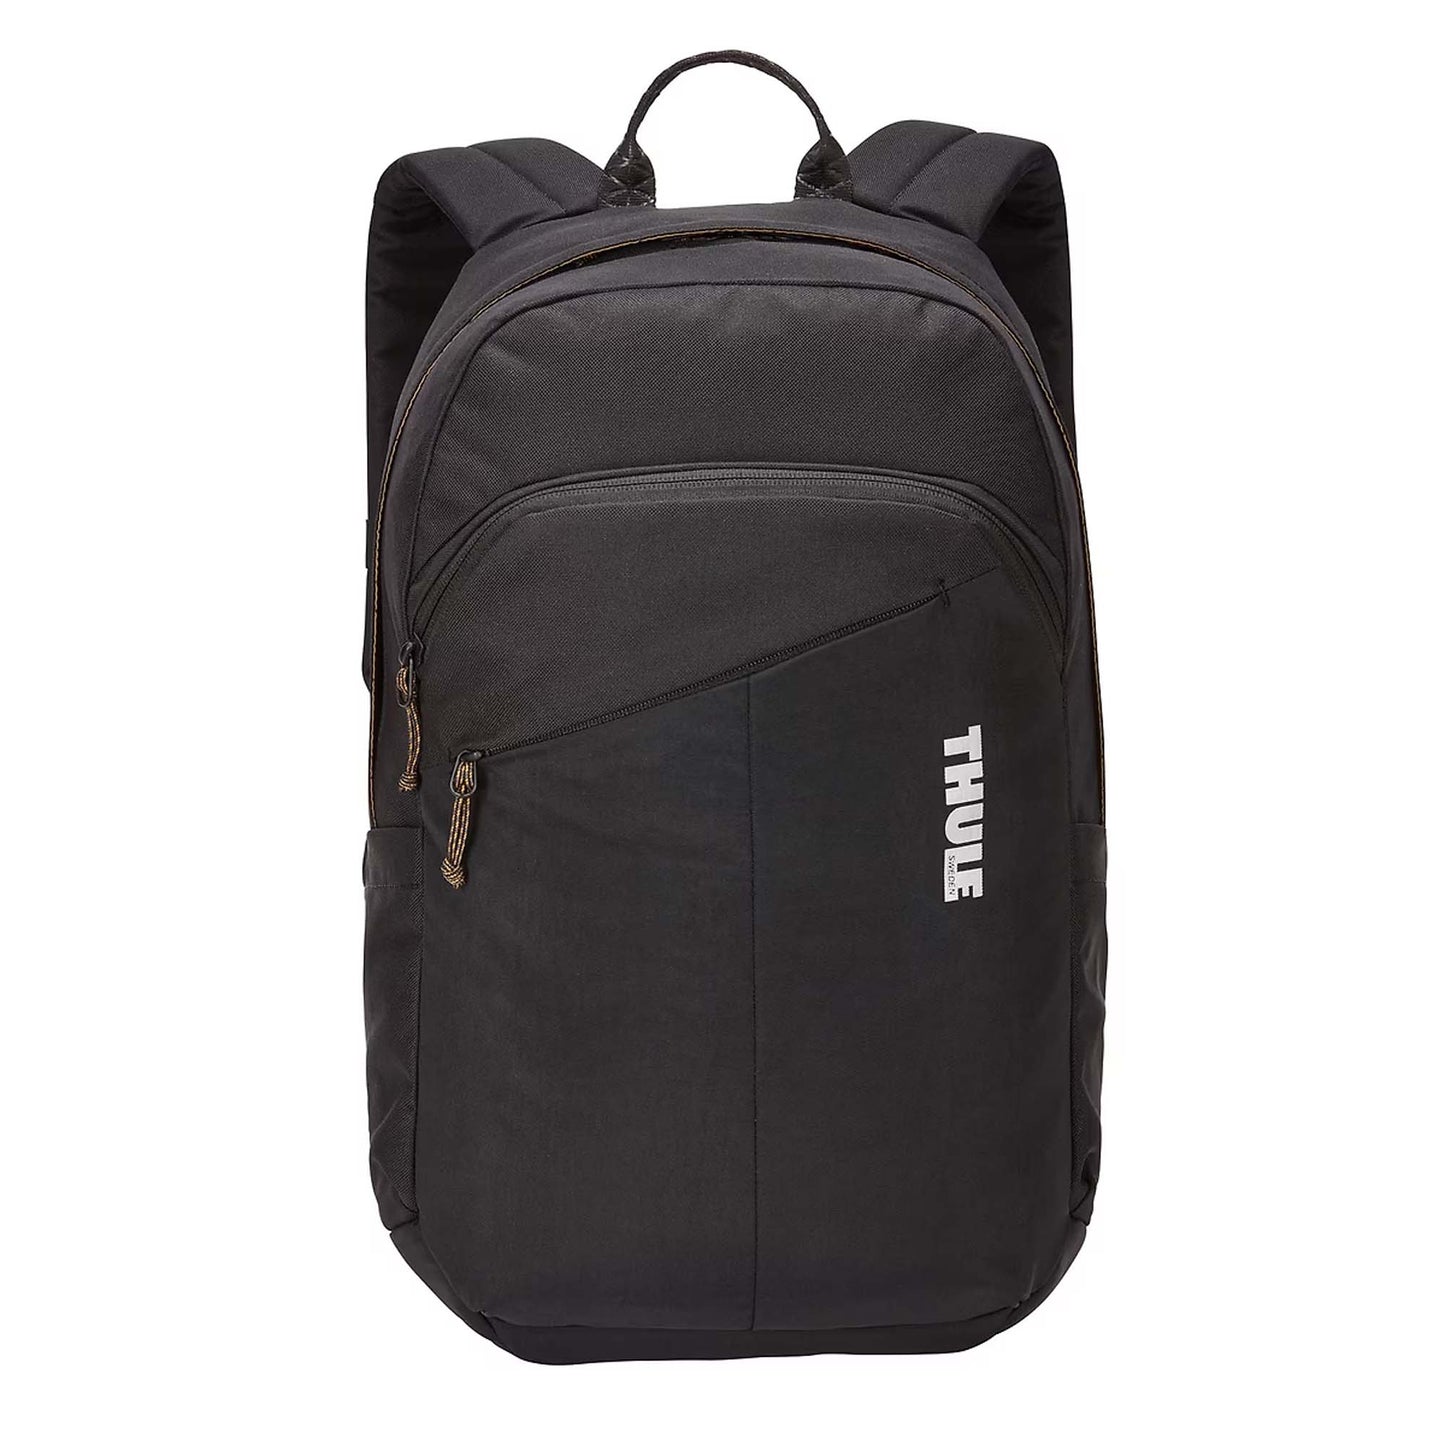 Thule Indago 23L Backpack - Fit up to 15.6" Laptop or 16" MacBook - Black (Barcode: 0085854247948 )